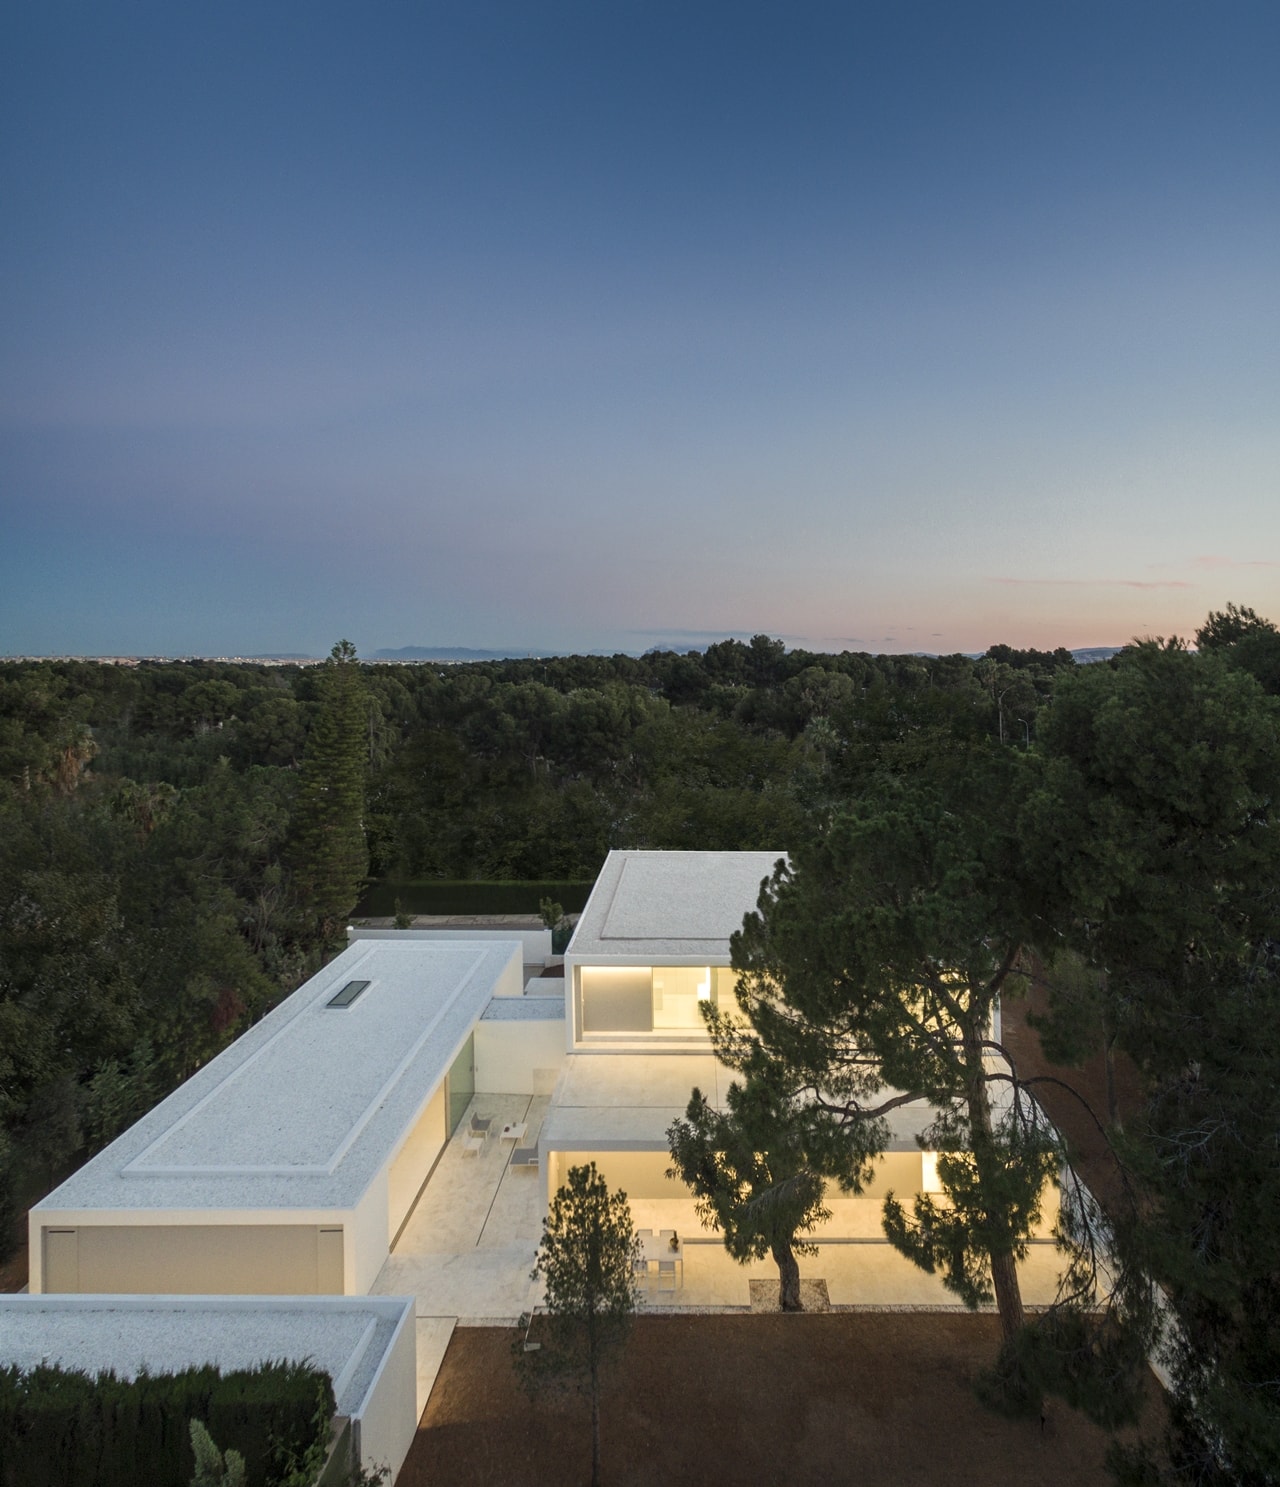 Minimalist house designed by Fran Silvestre Architects as seen from the air